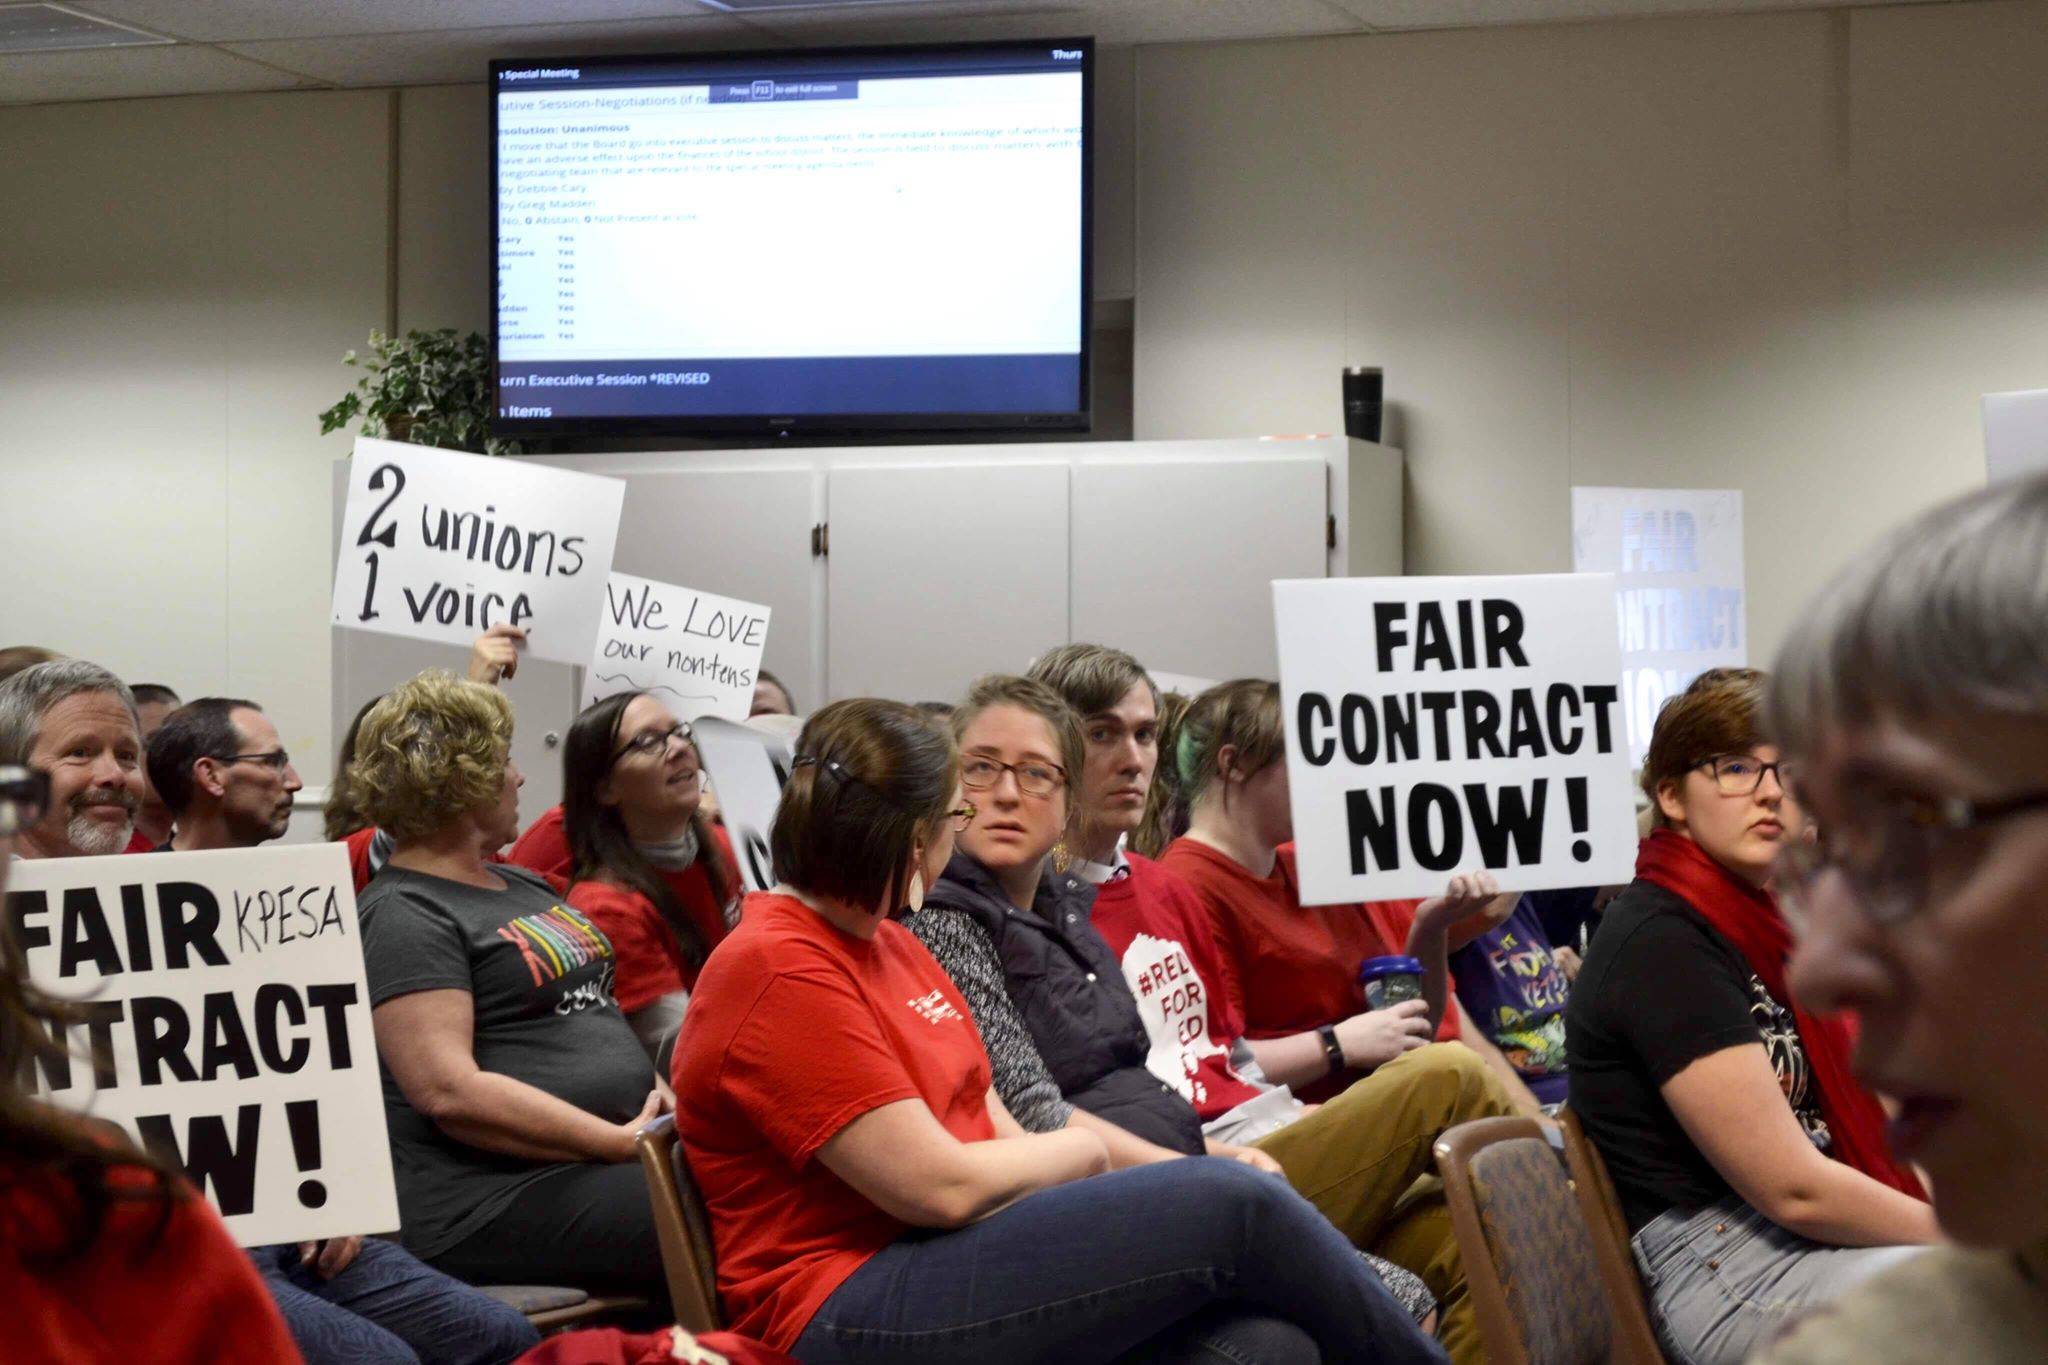 Kenai Peninsula Borough School District employees hold signs for a fair contract at Thursday’s special board of education meeting, May 16, 2019, In Soldotna, Alaska. (Photo by Victoria Petersen/Peninsula Clarion)